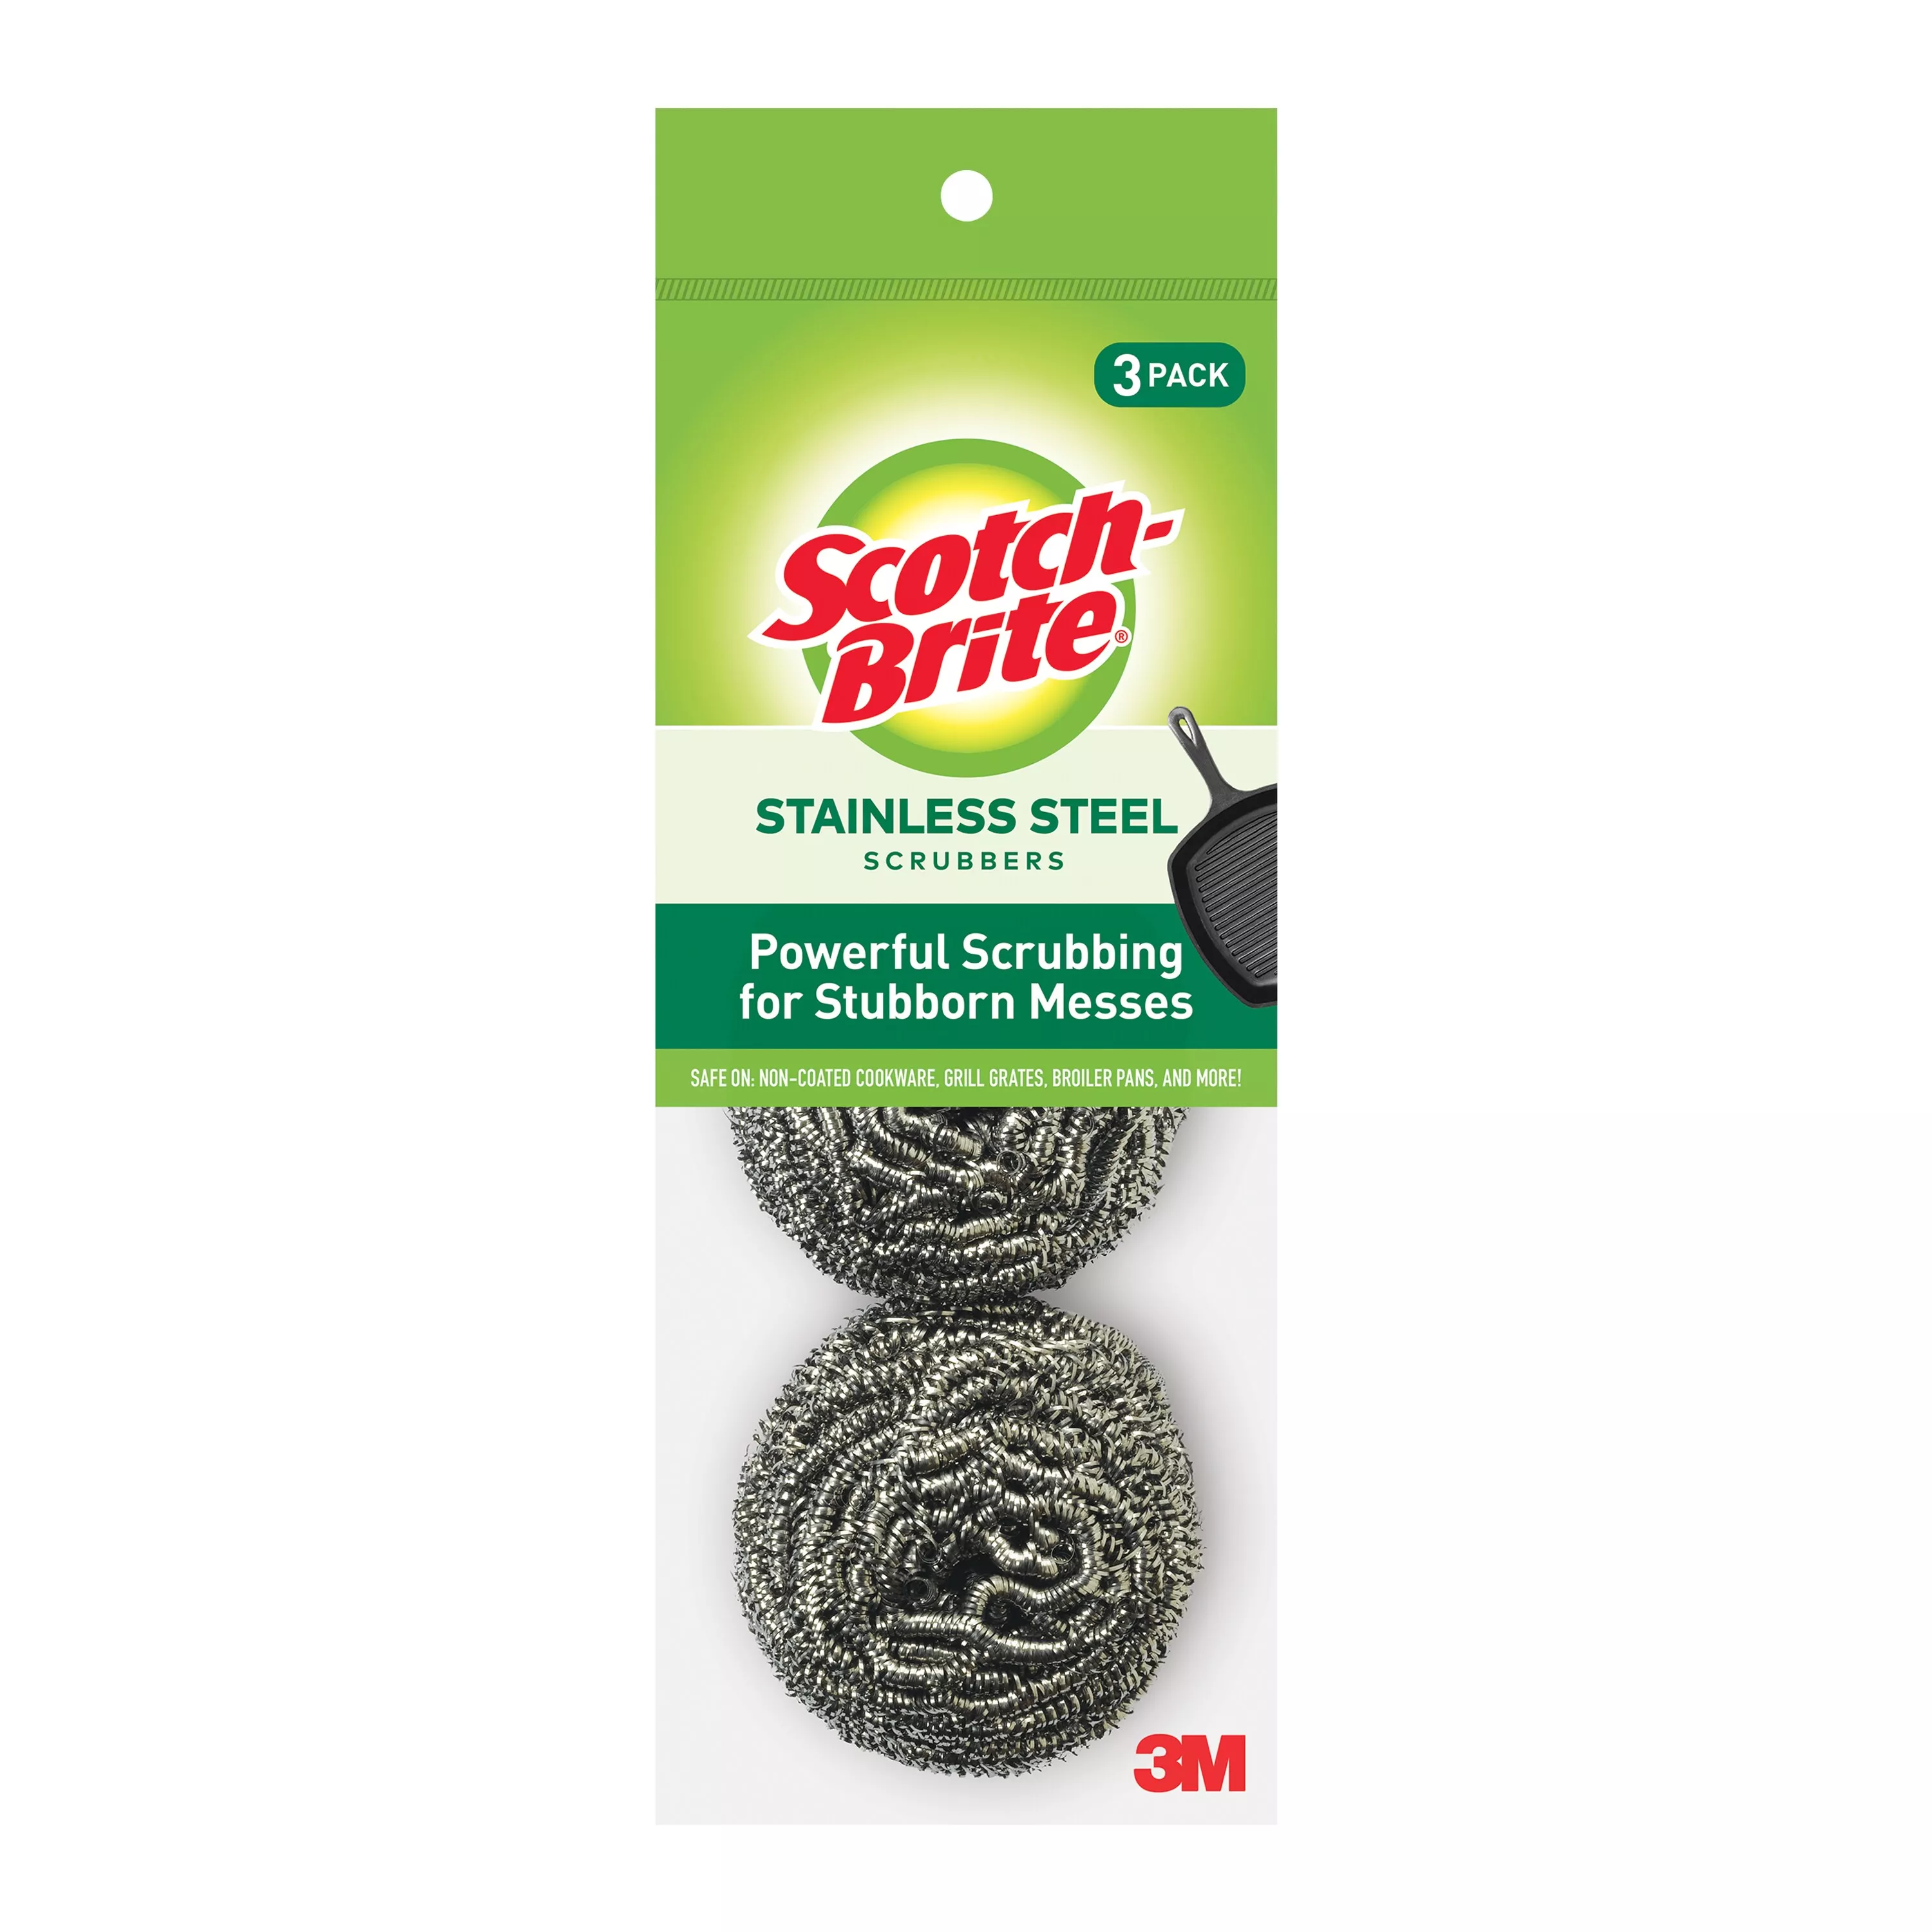 Scotch-Brite® Stainless Steel Scouring Pad 214C, 8/3